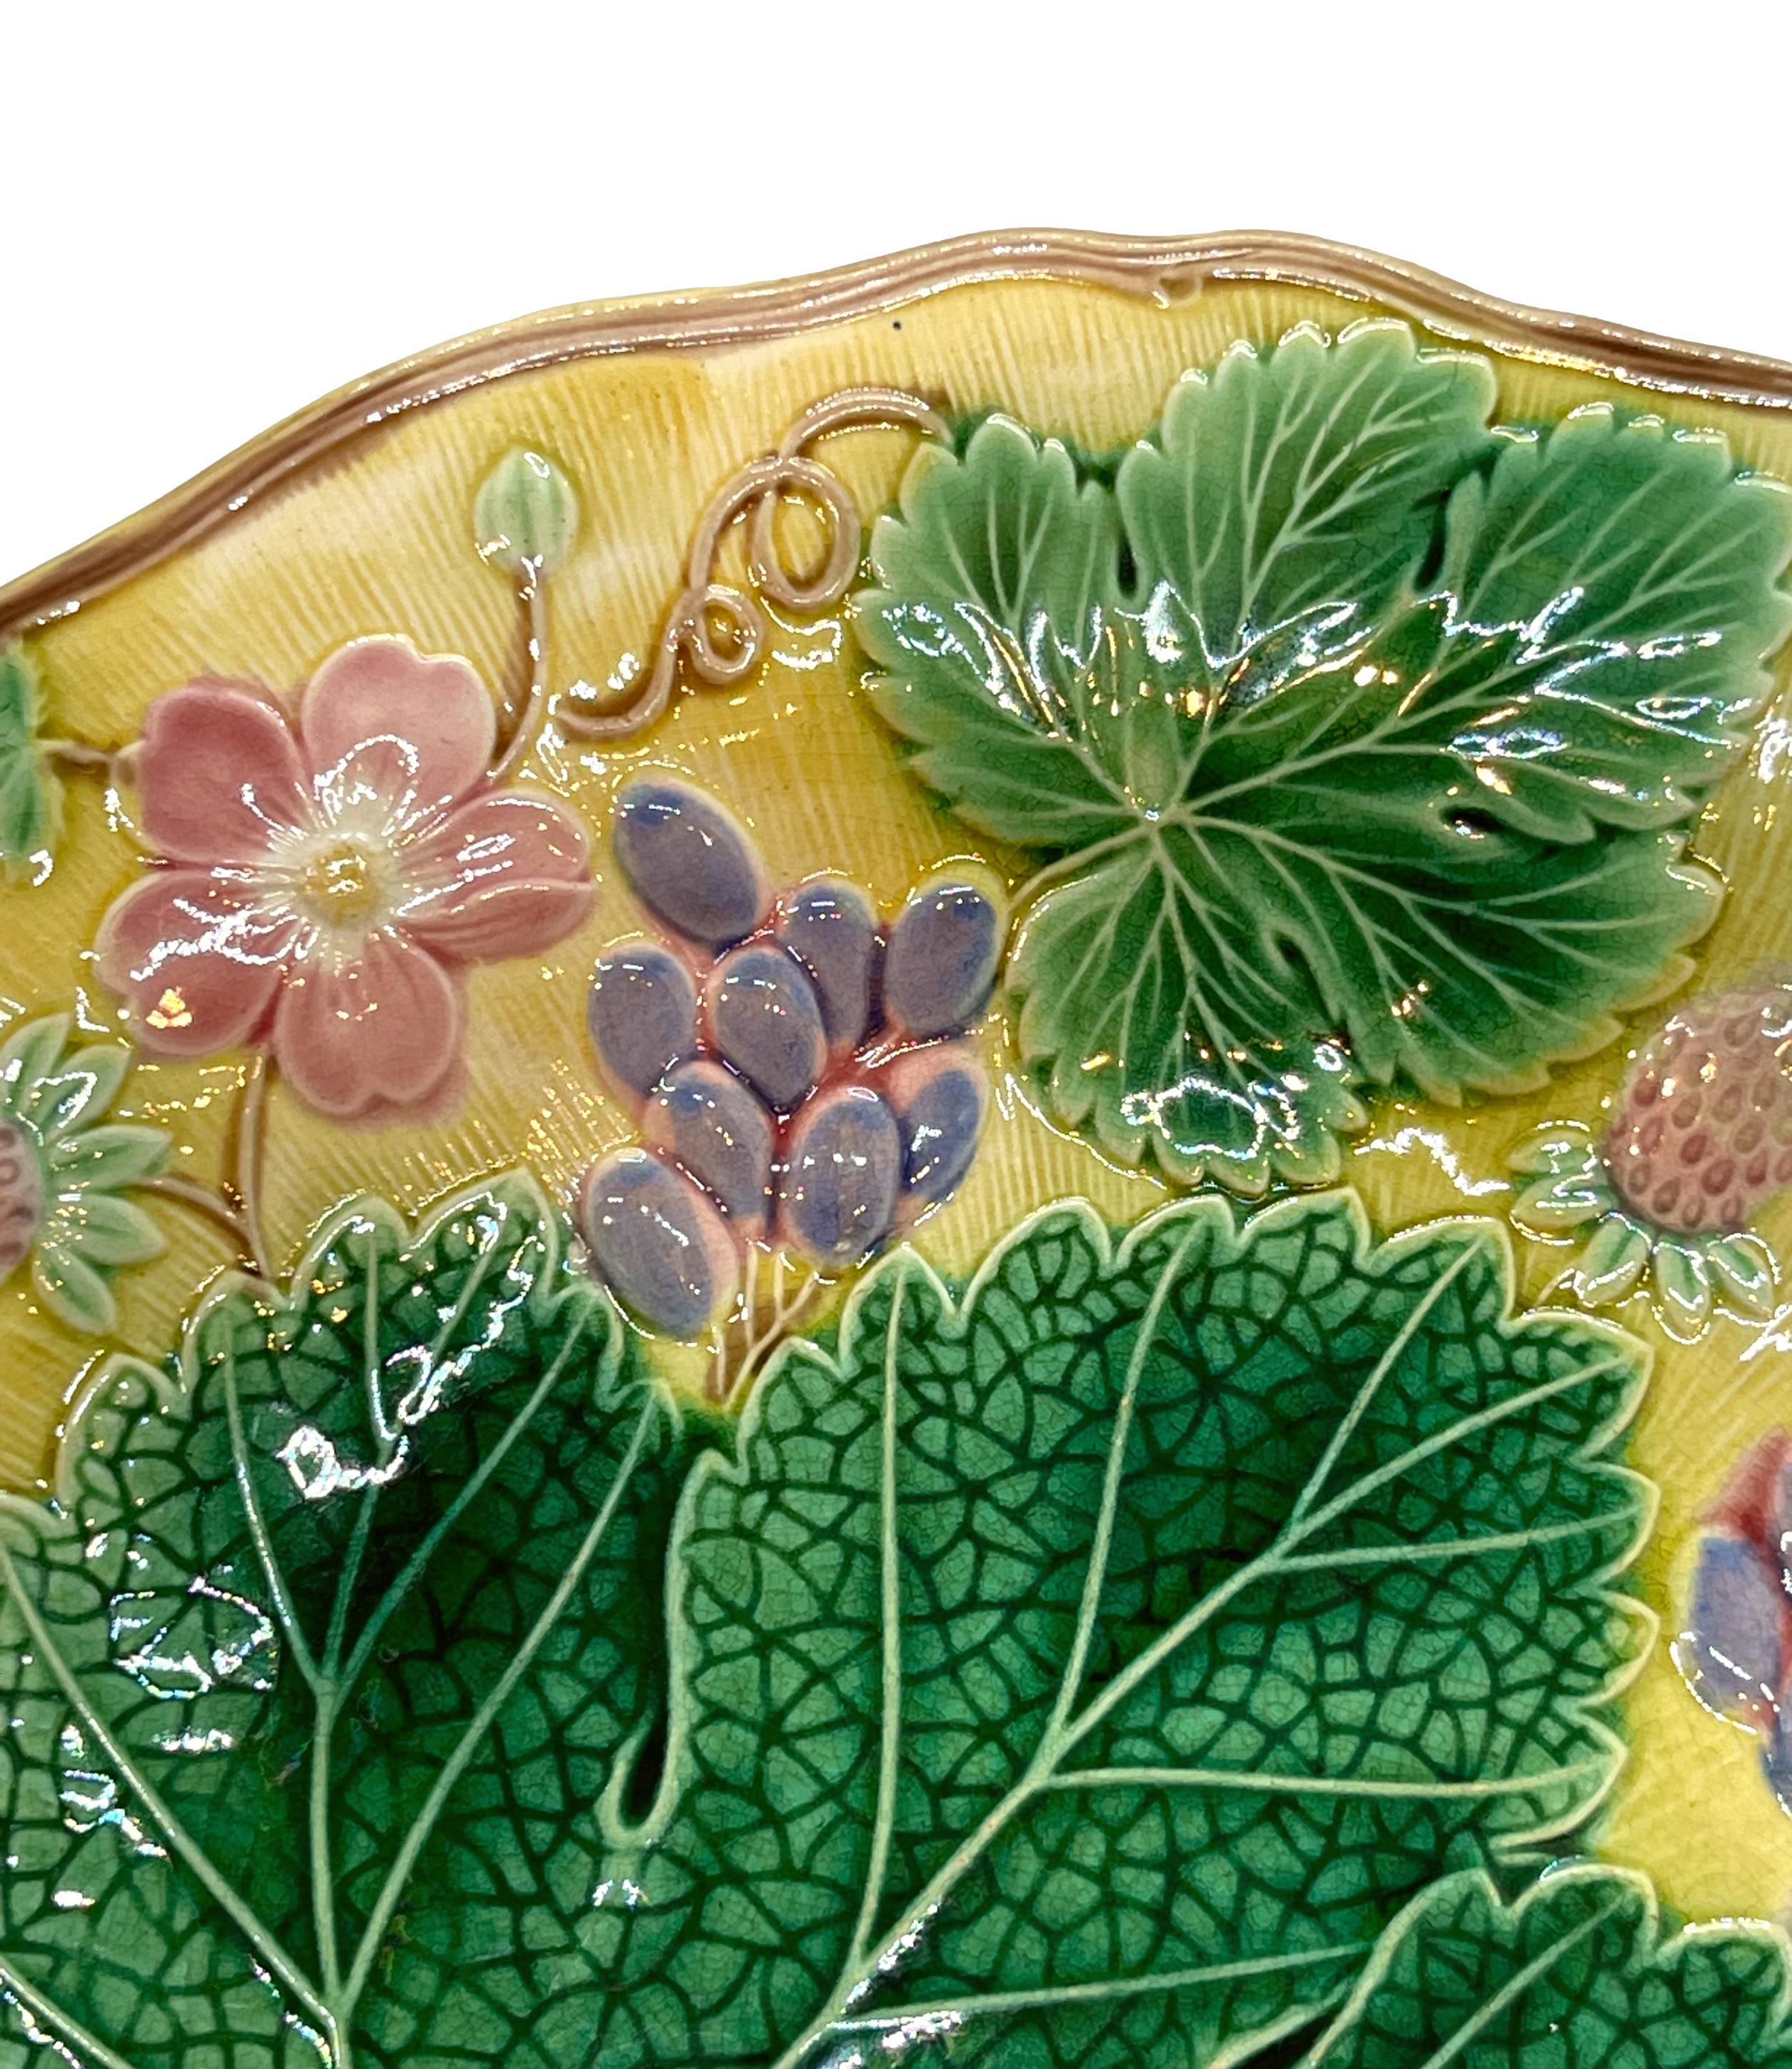 Wedgwood Majolica 'Vine & Strawberry' plate, English, dated 1930, with a large central green grape leaf, purple grapes, reddish pink strawberries and blossoms on a yellow ground. Impressed marks to reverse: 'Wedgwood' 'MADE IN ENGLAND' and the